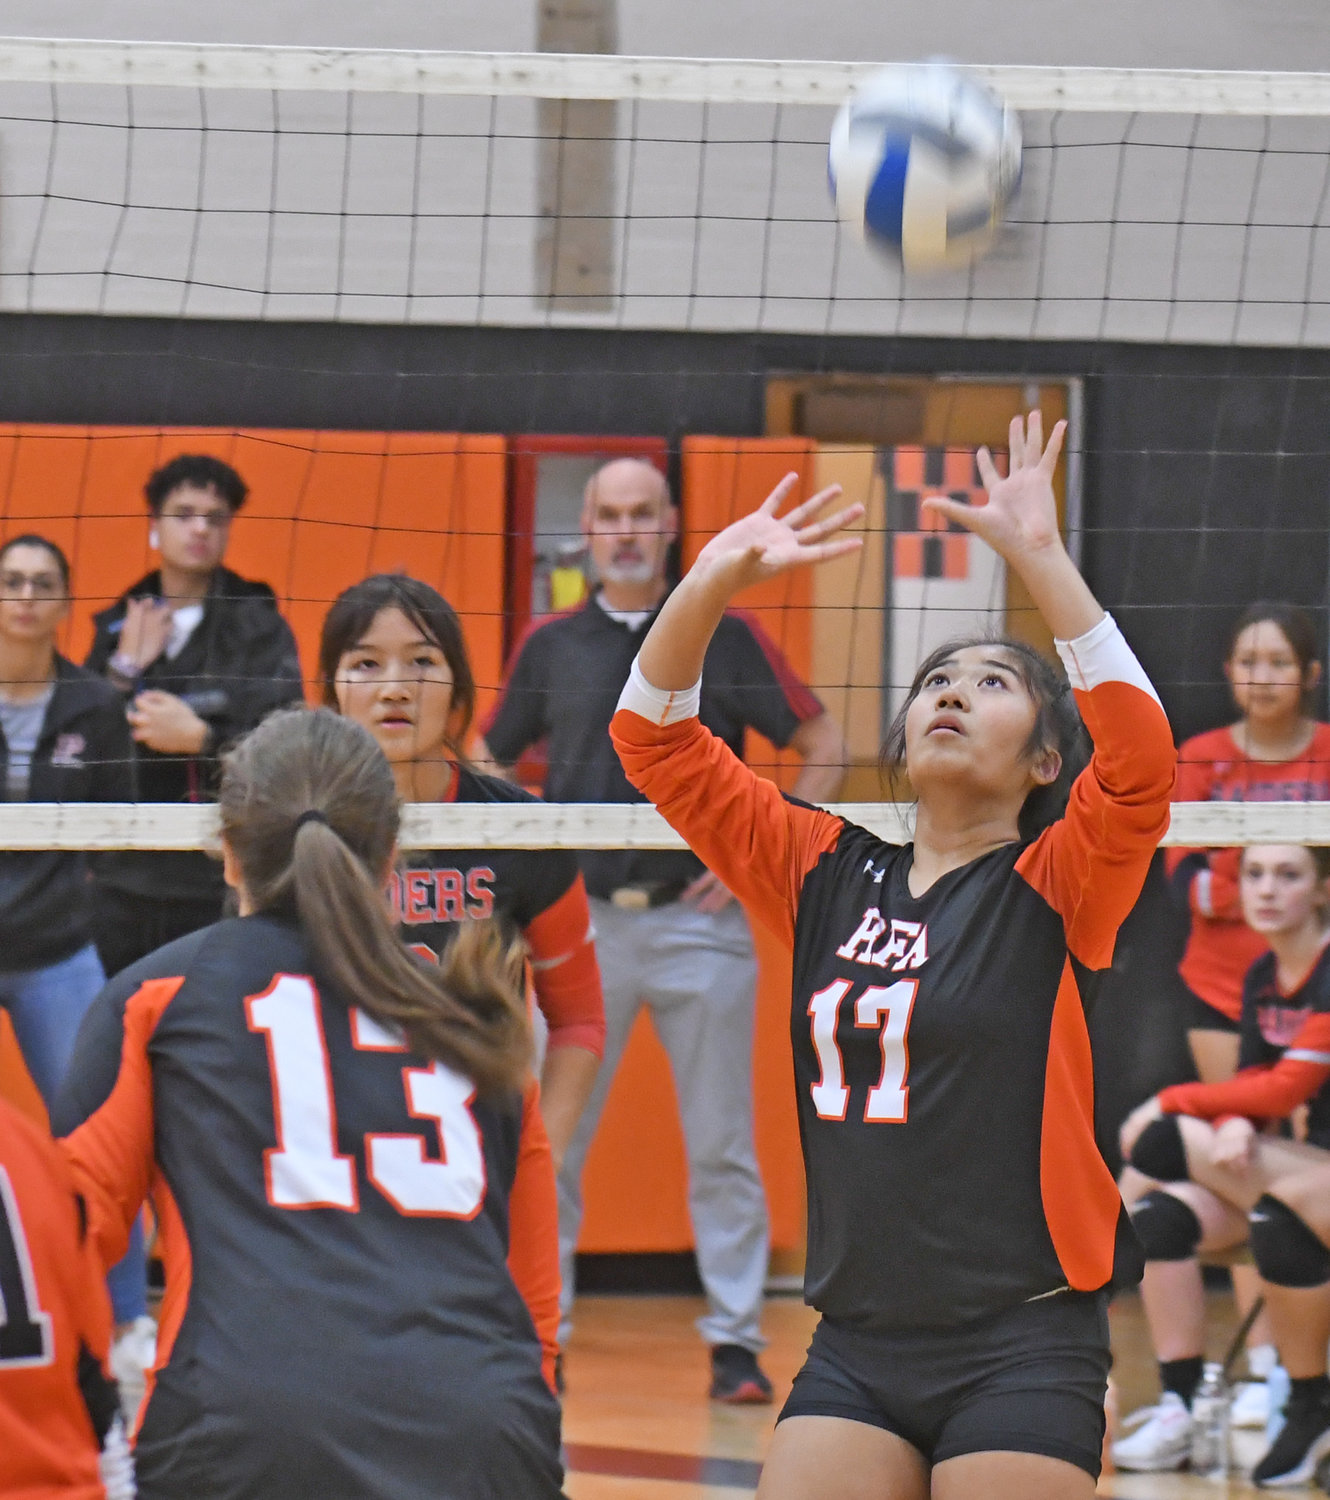 Rome Free Academy's Thylia Keoviengsamay (17) concentrates on the ball to set it for Miranda McCormick (13) Monday versus Thomas R. Proctor High School at Strough Junior High. The Black Knights won 3-0. Keoviengsamay had 19 assists.